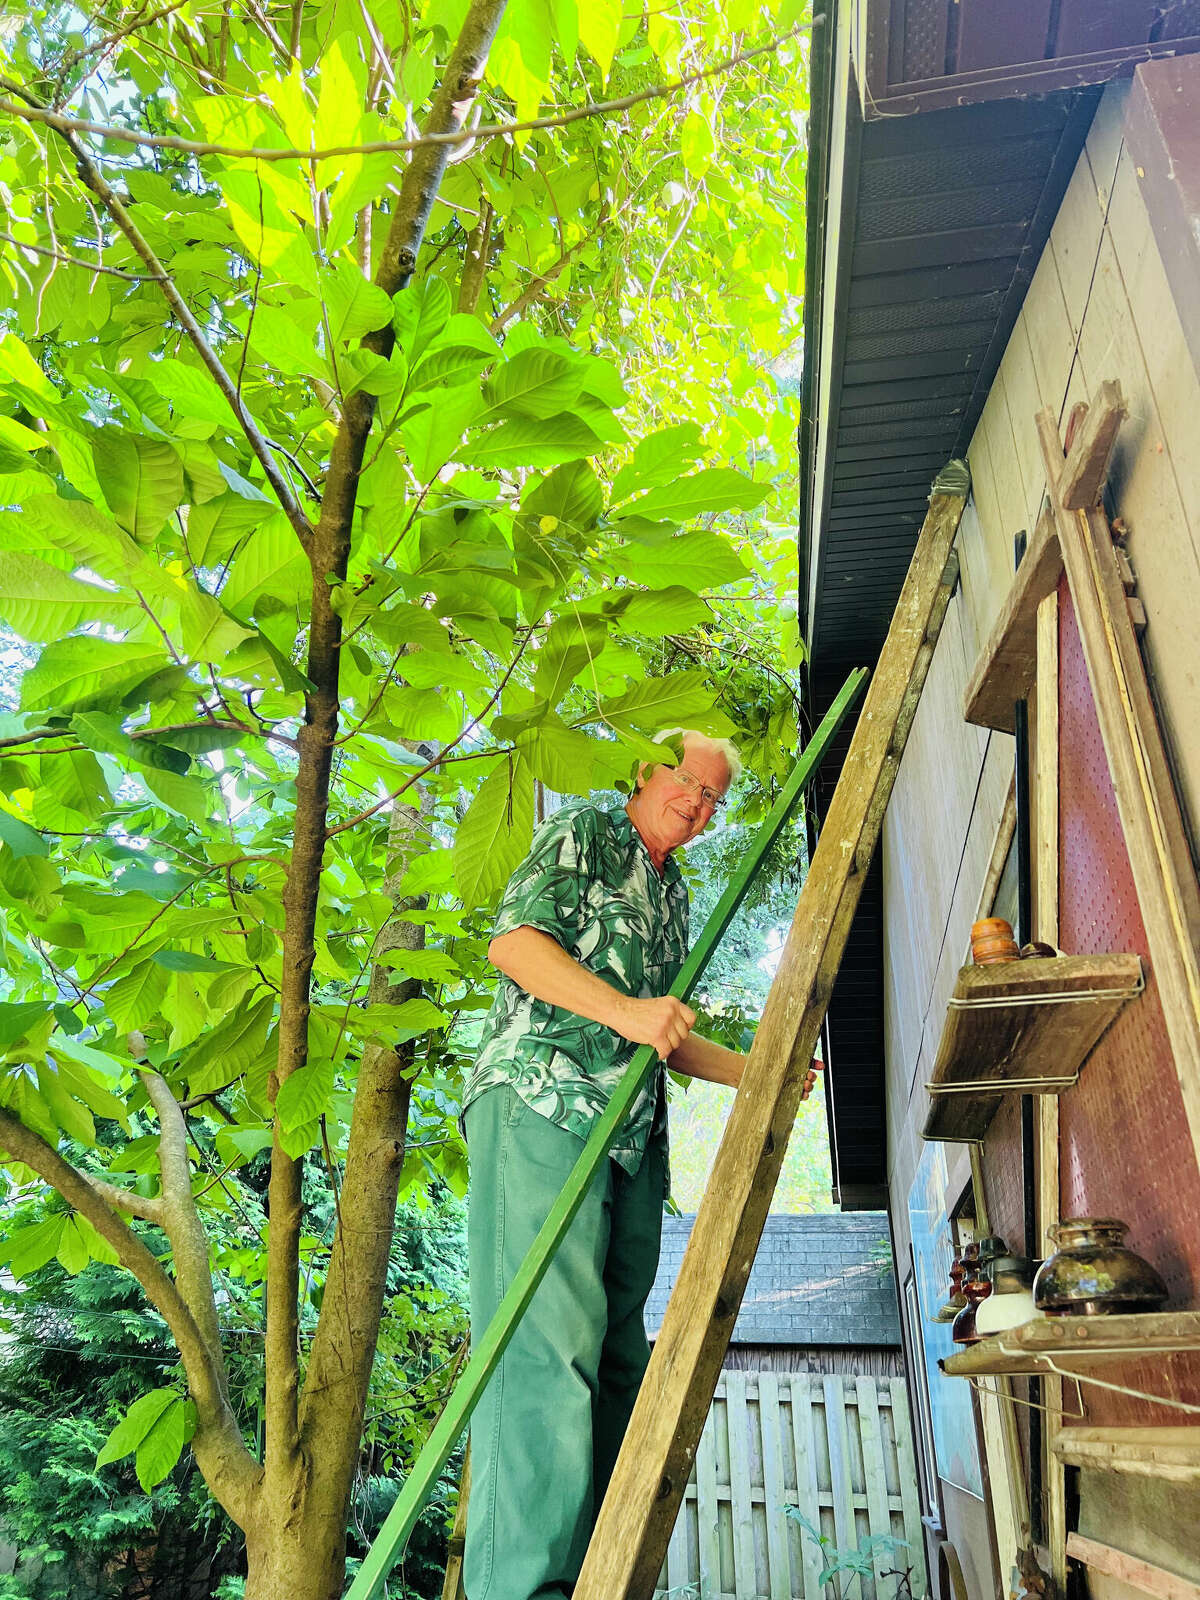 Gary Vondrasek, of Edwardsville, climbs a ladder to shake one of his pawpaw trees of its fruit, which is ripe and ready for harvest late August through mid September. There's about a week left to shake the trees.